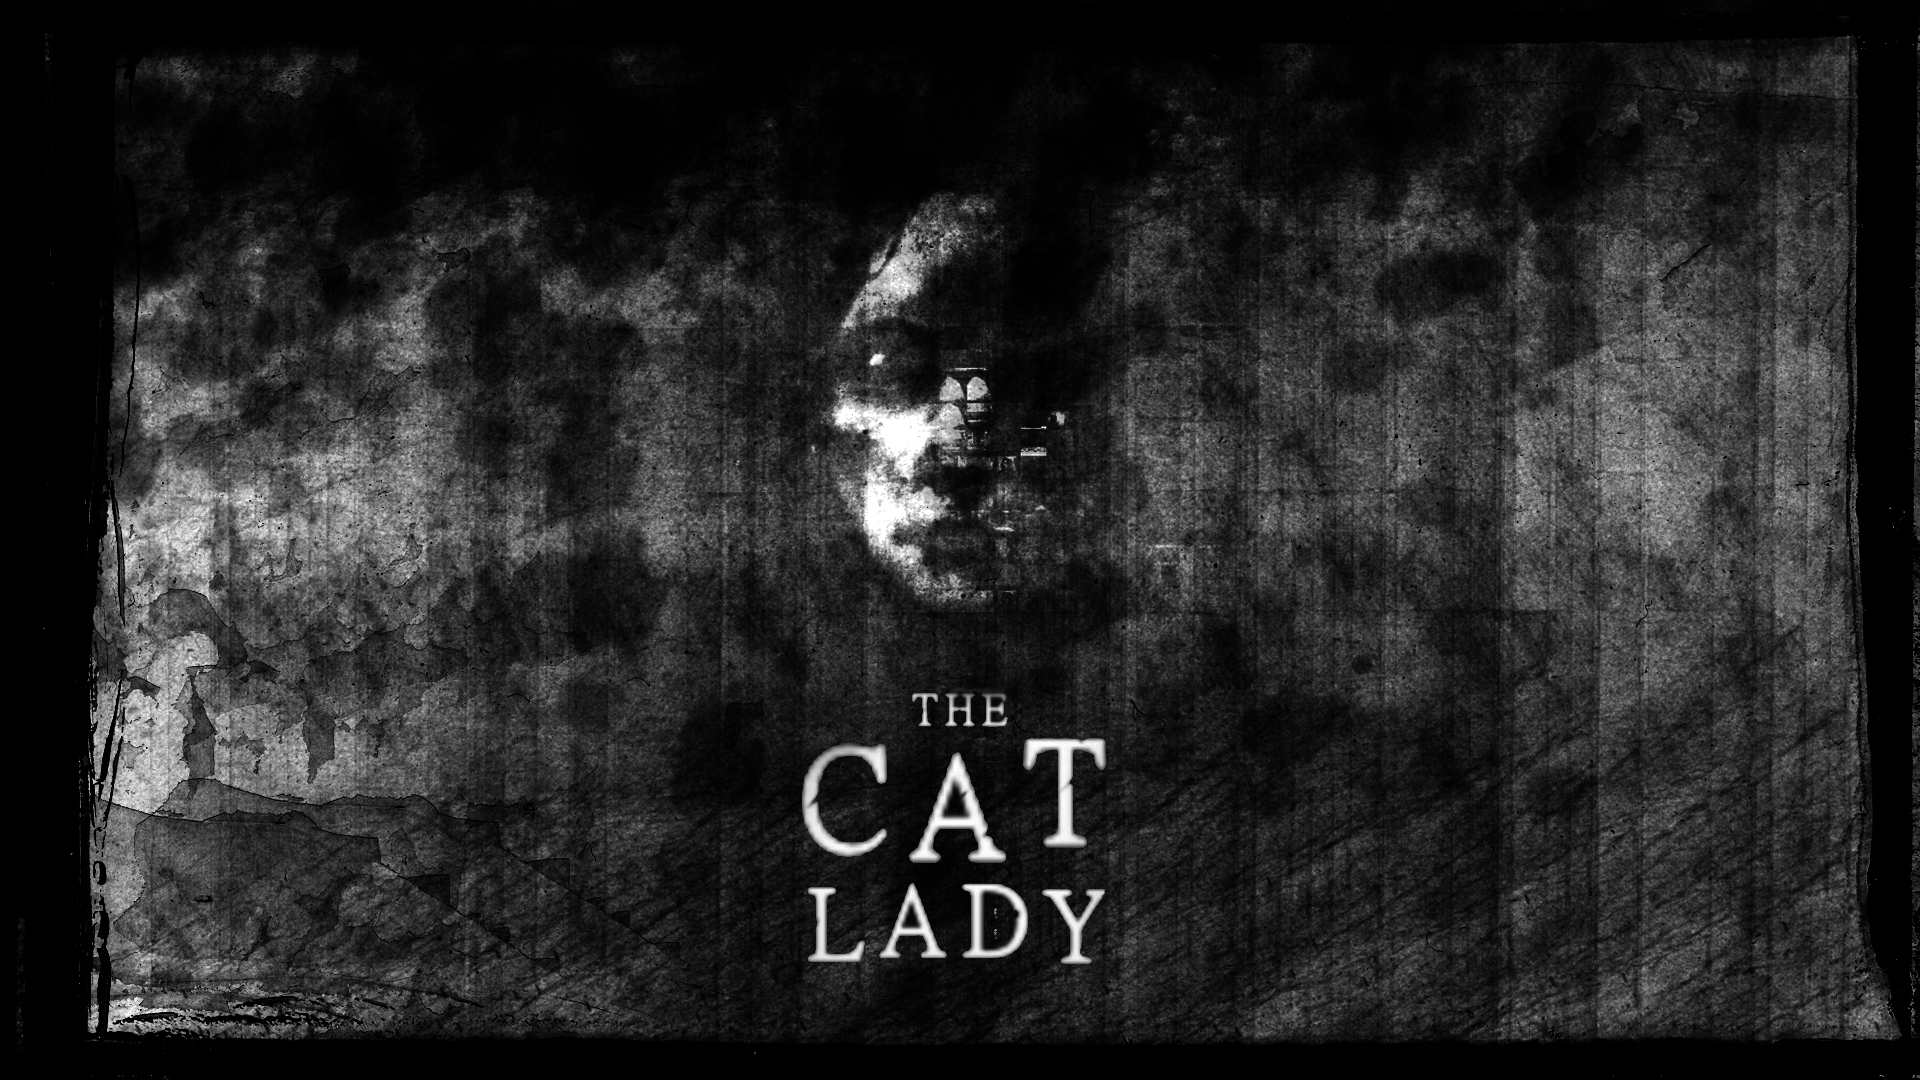 the_cat_lady_wallpaper_by_gezginorman-d653wb5.jpg